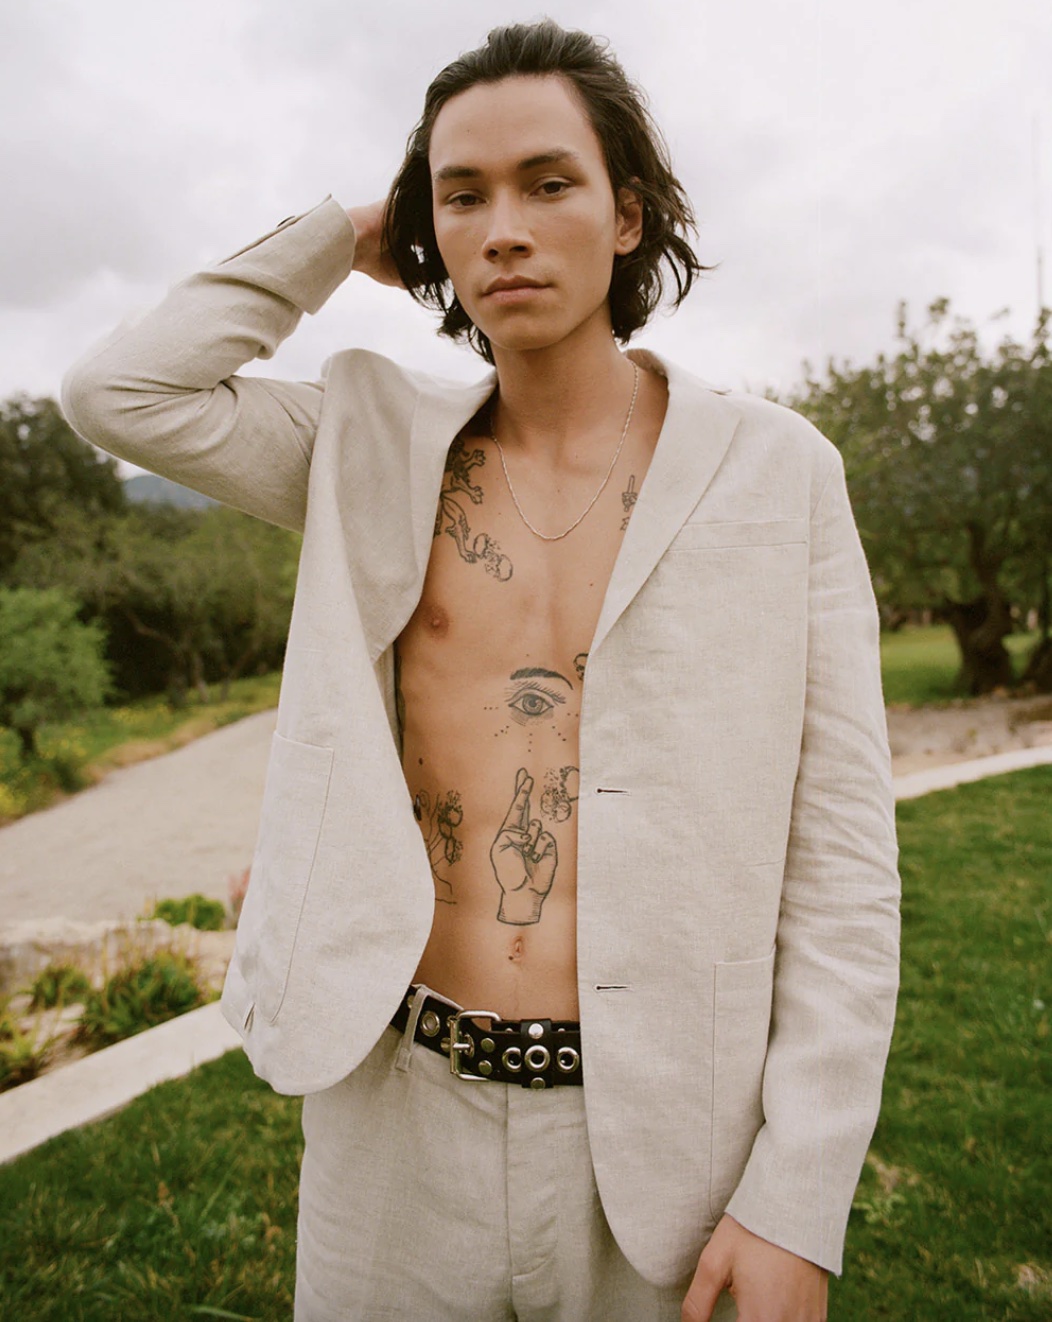 Man wearing a linen blazer with no shirt underneath, standing outside with tattoos on chest